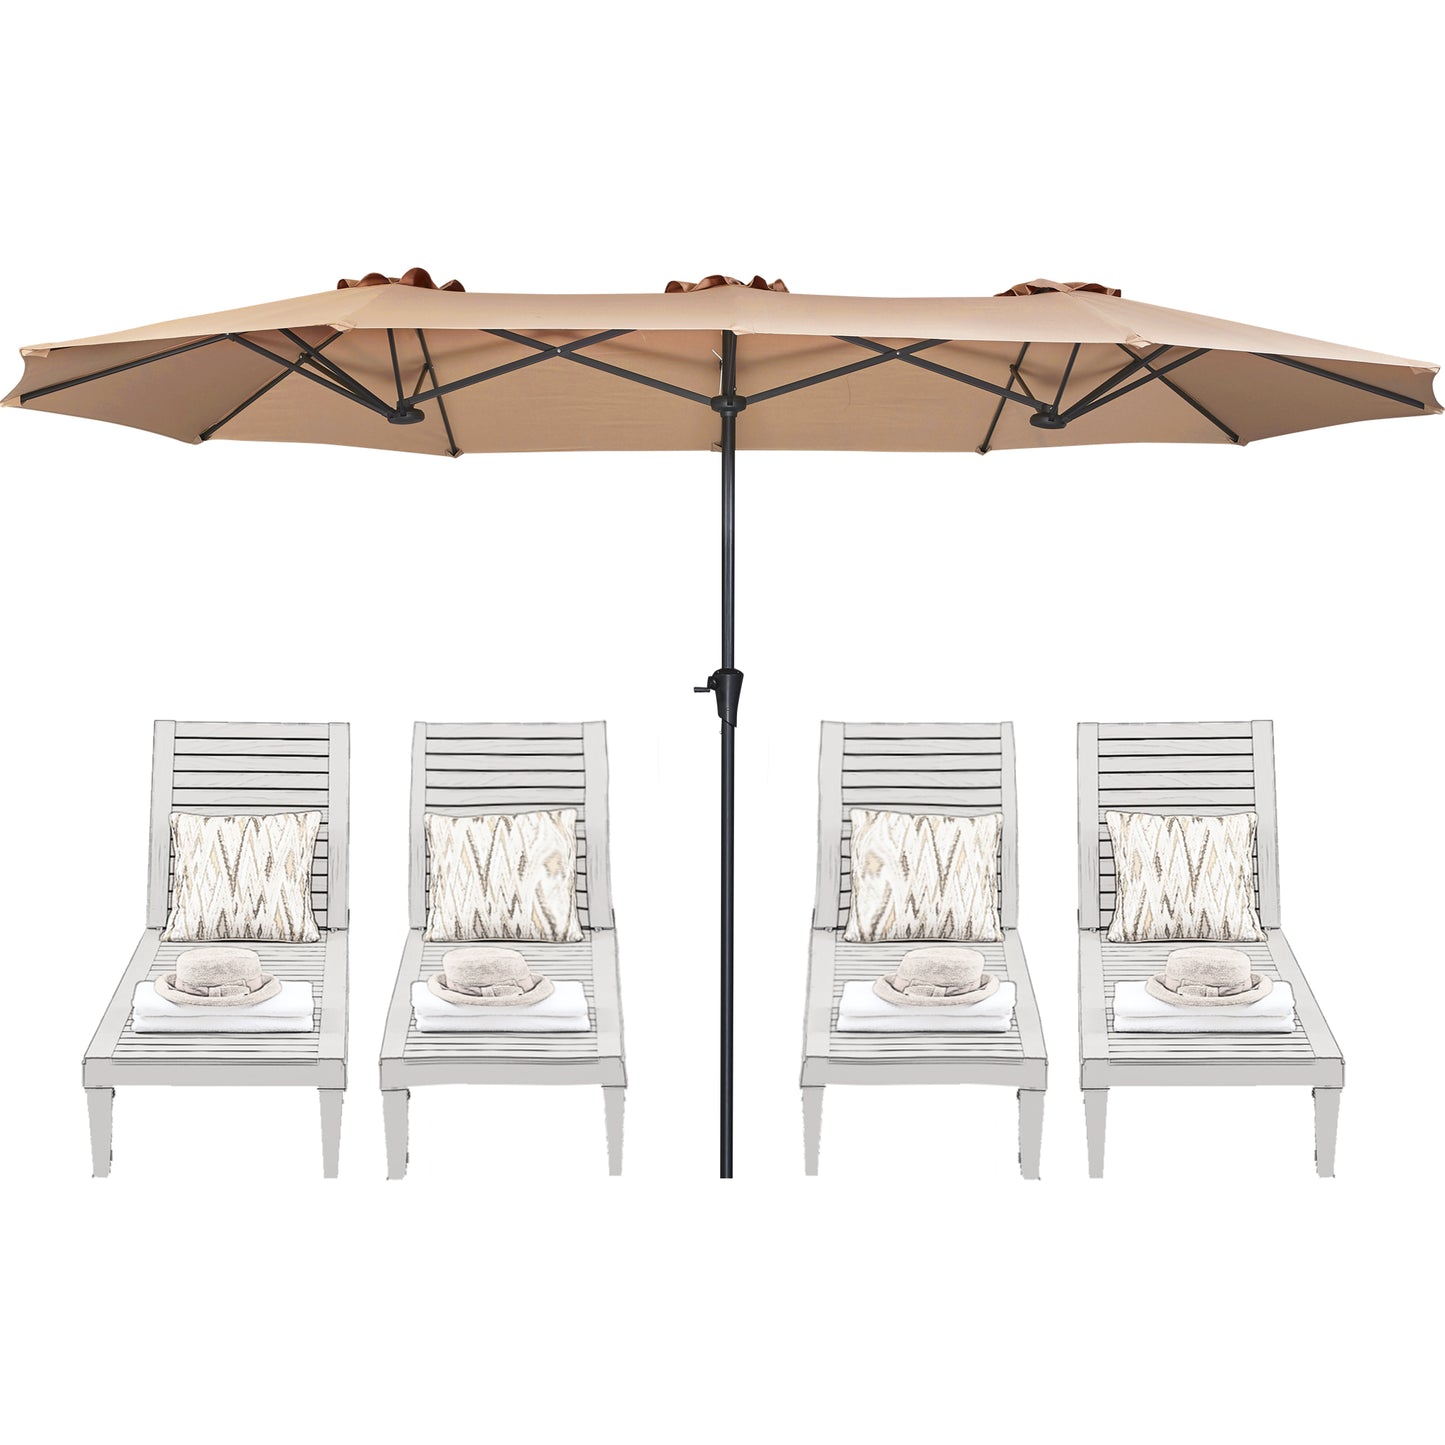 SUPERJARE 13FT Umbrella Outdoor Patio, Double sided Pool Umbrellas with Fade Resistant Canopy, Large Table Umbrella for Deck, Market, Backyard - Beige